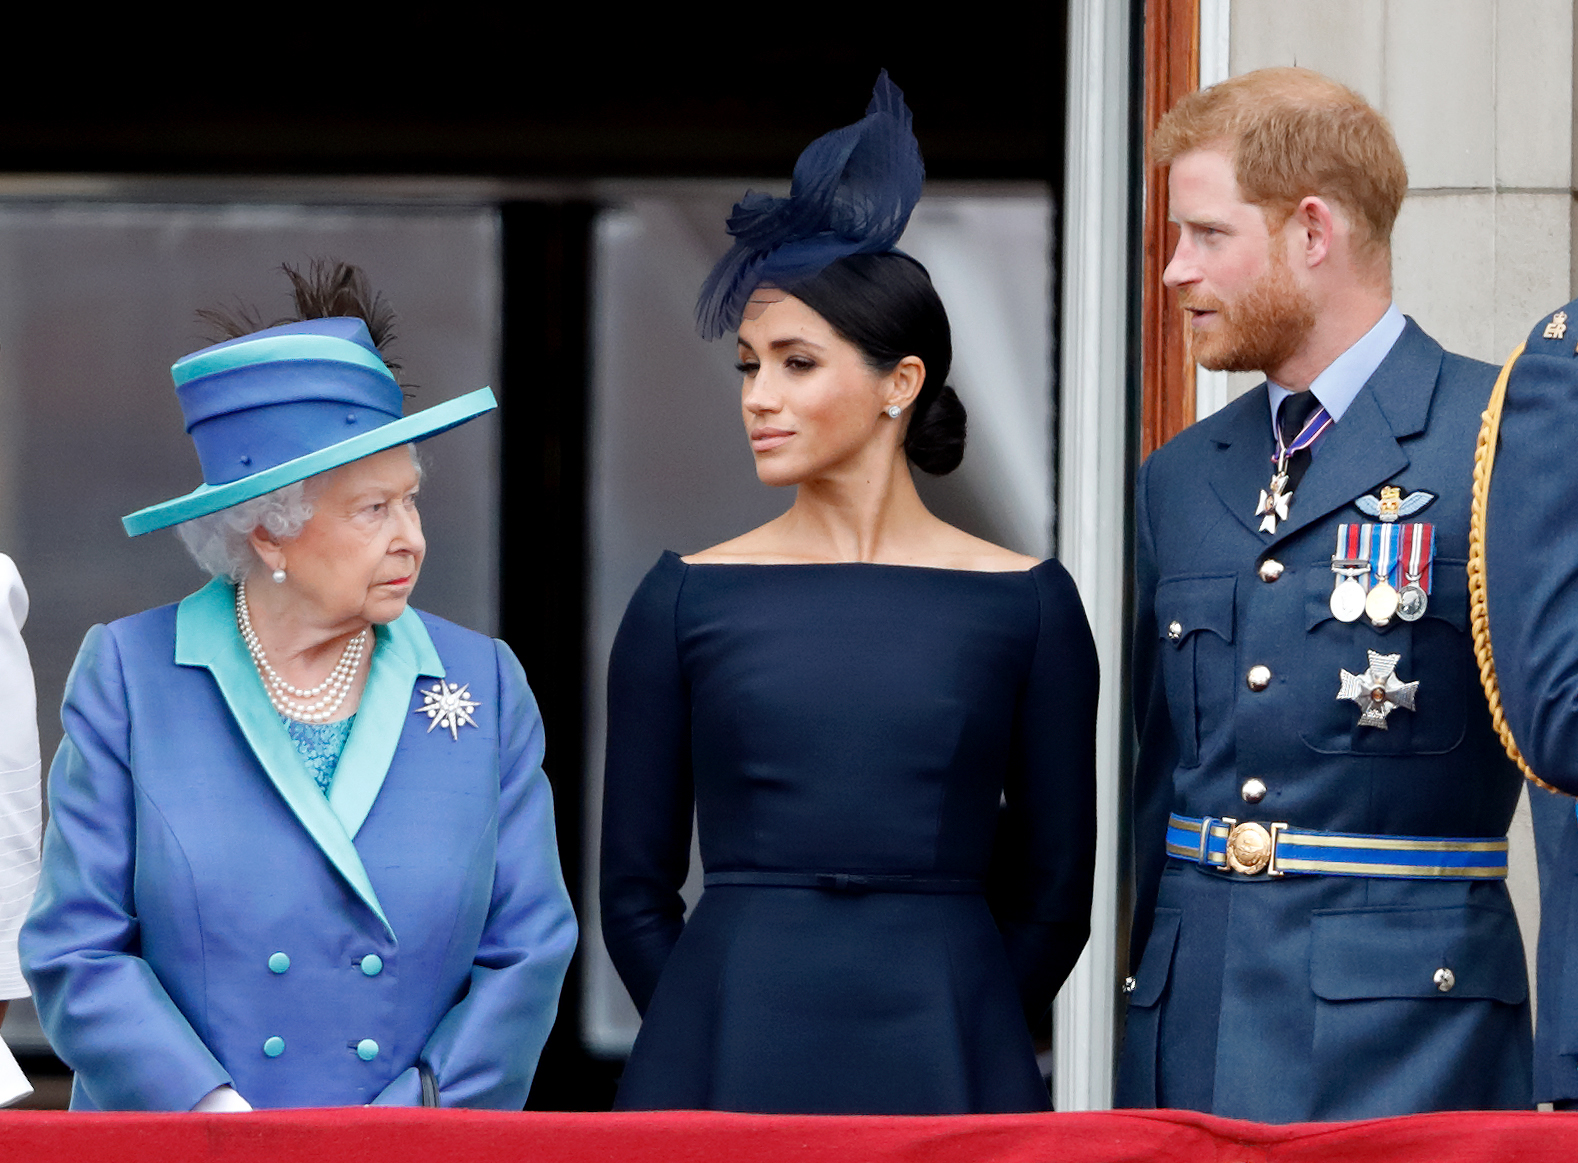 Queen Elizabeth II, Meghan Markle and Prince Harry watch the Royal Air Force's 100th anniversary fly pass from the balcony of Buckingham Palace in London, England, 2018.